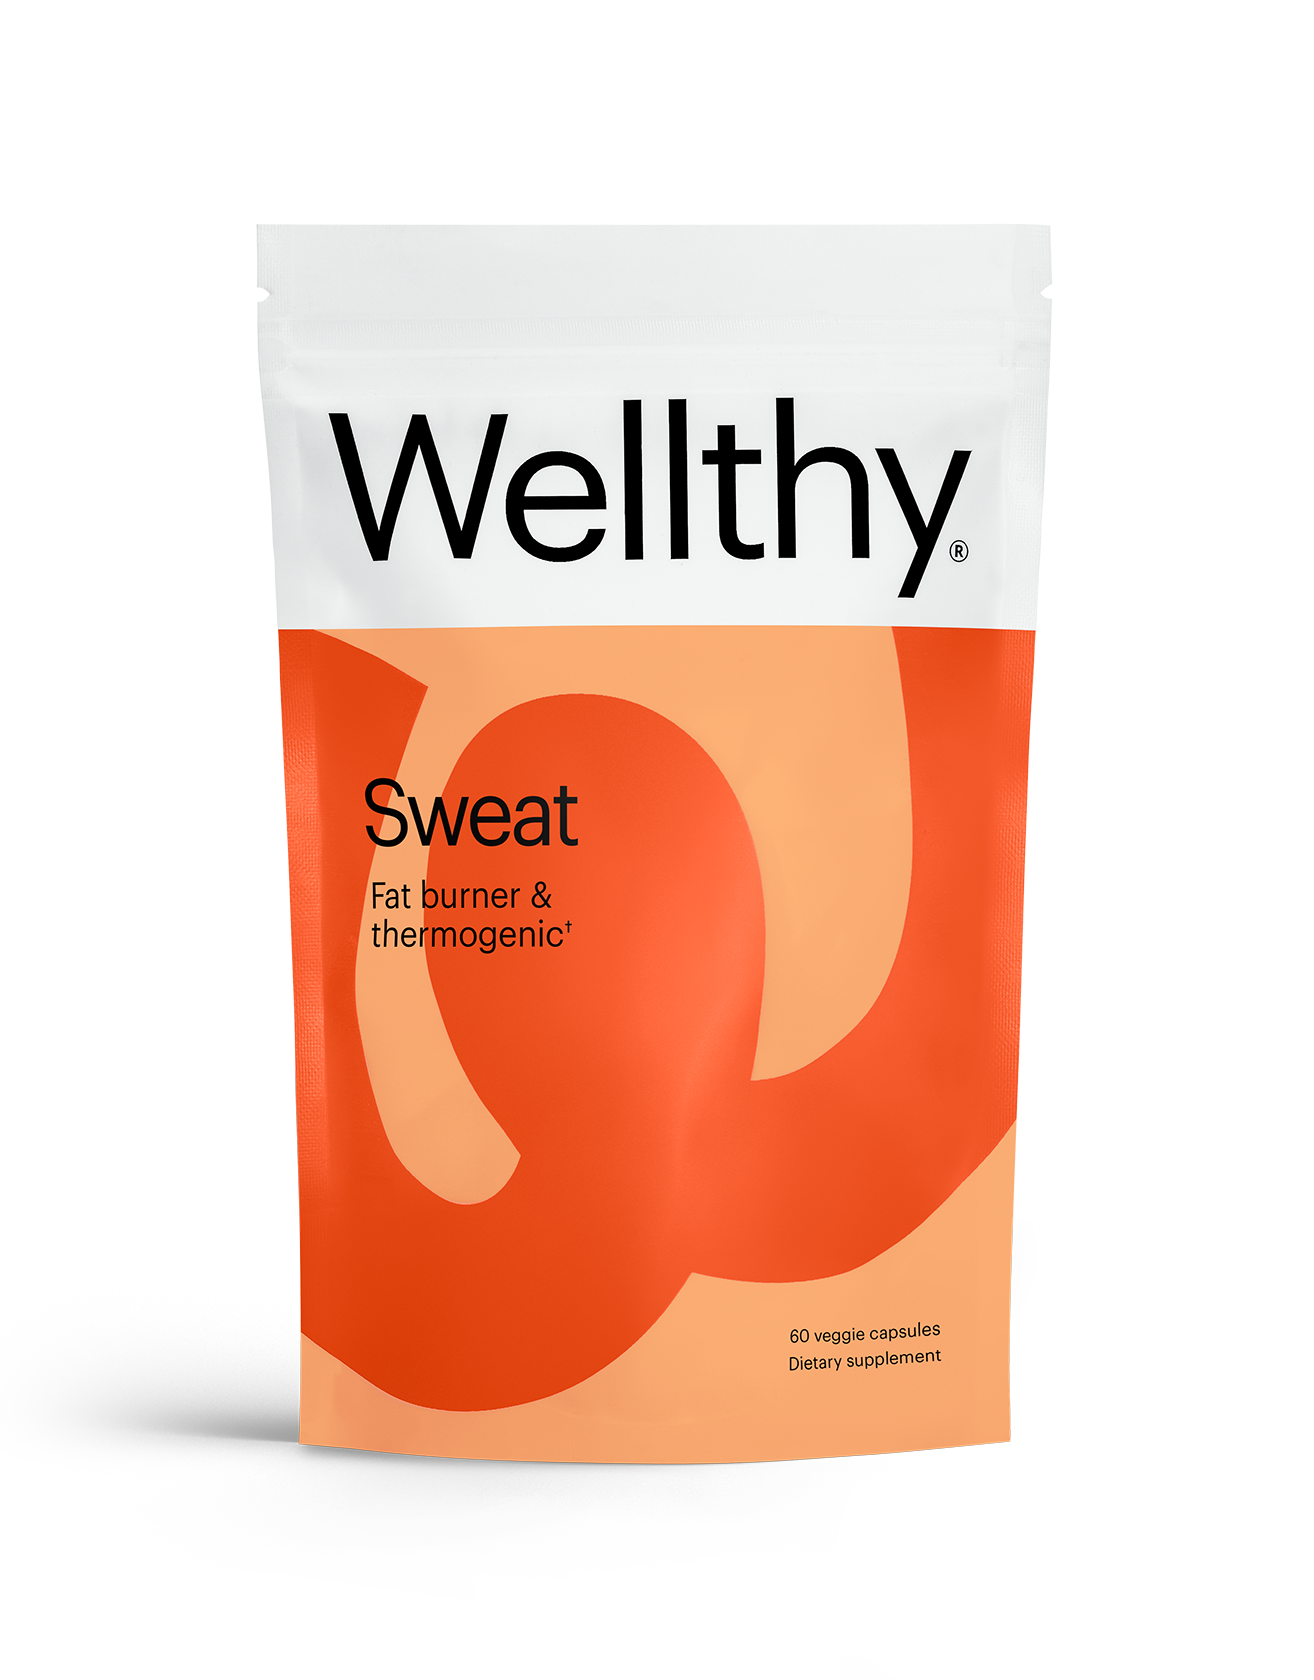 HER 30 Day Redefined: her-sweat-revive Bundle Wellthy Nutraceuticals 